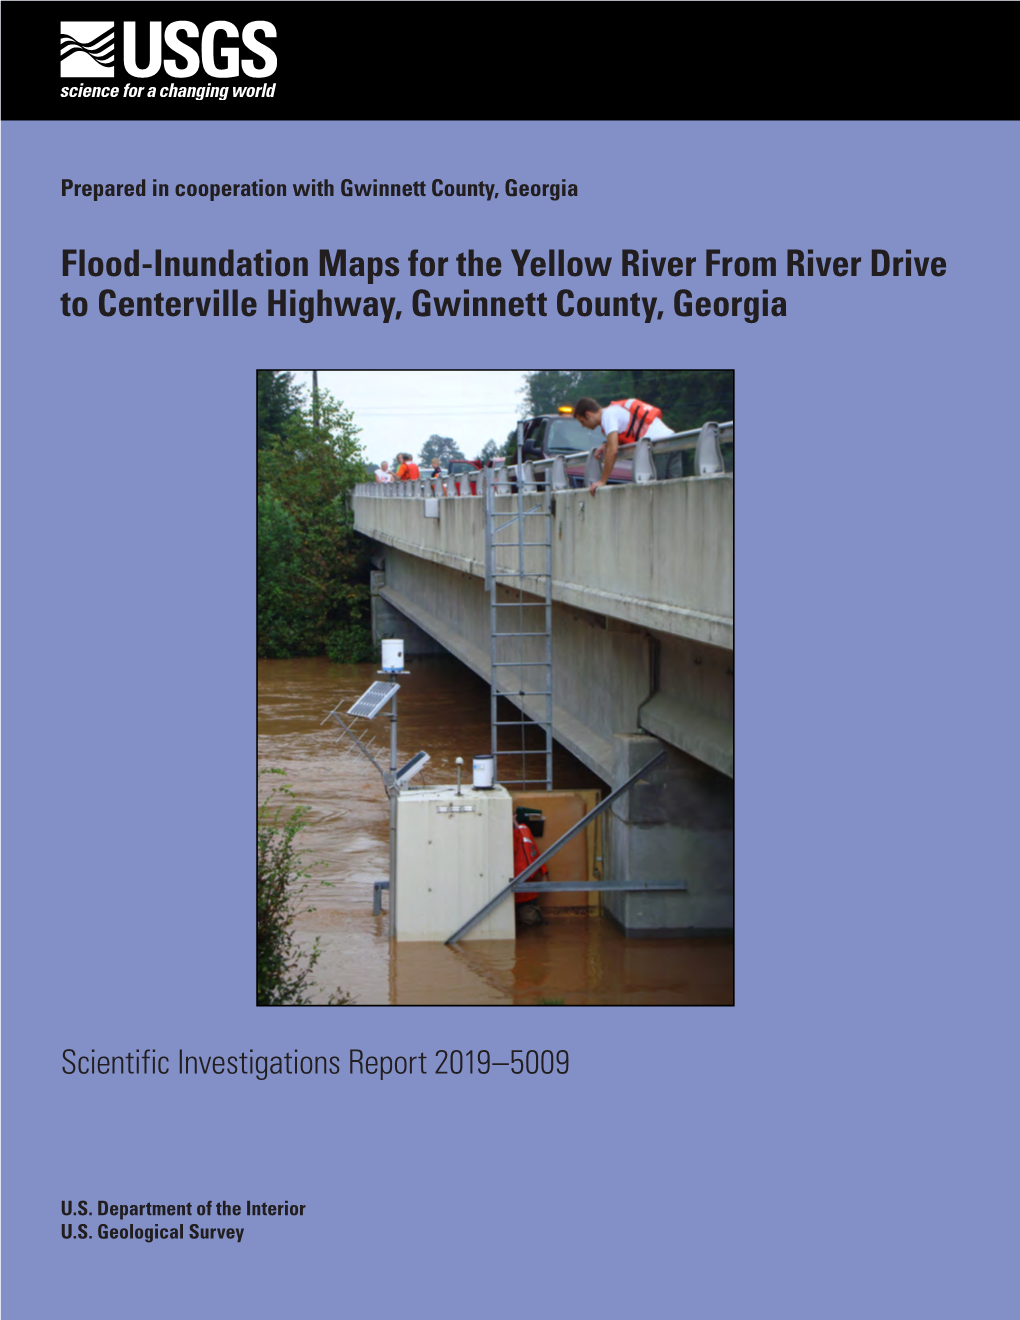 Flood-Inundation Maps for the Yellow River from River Drive to Centerville Highway, Gwinnett County, Georgia